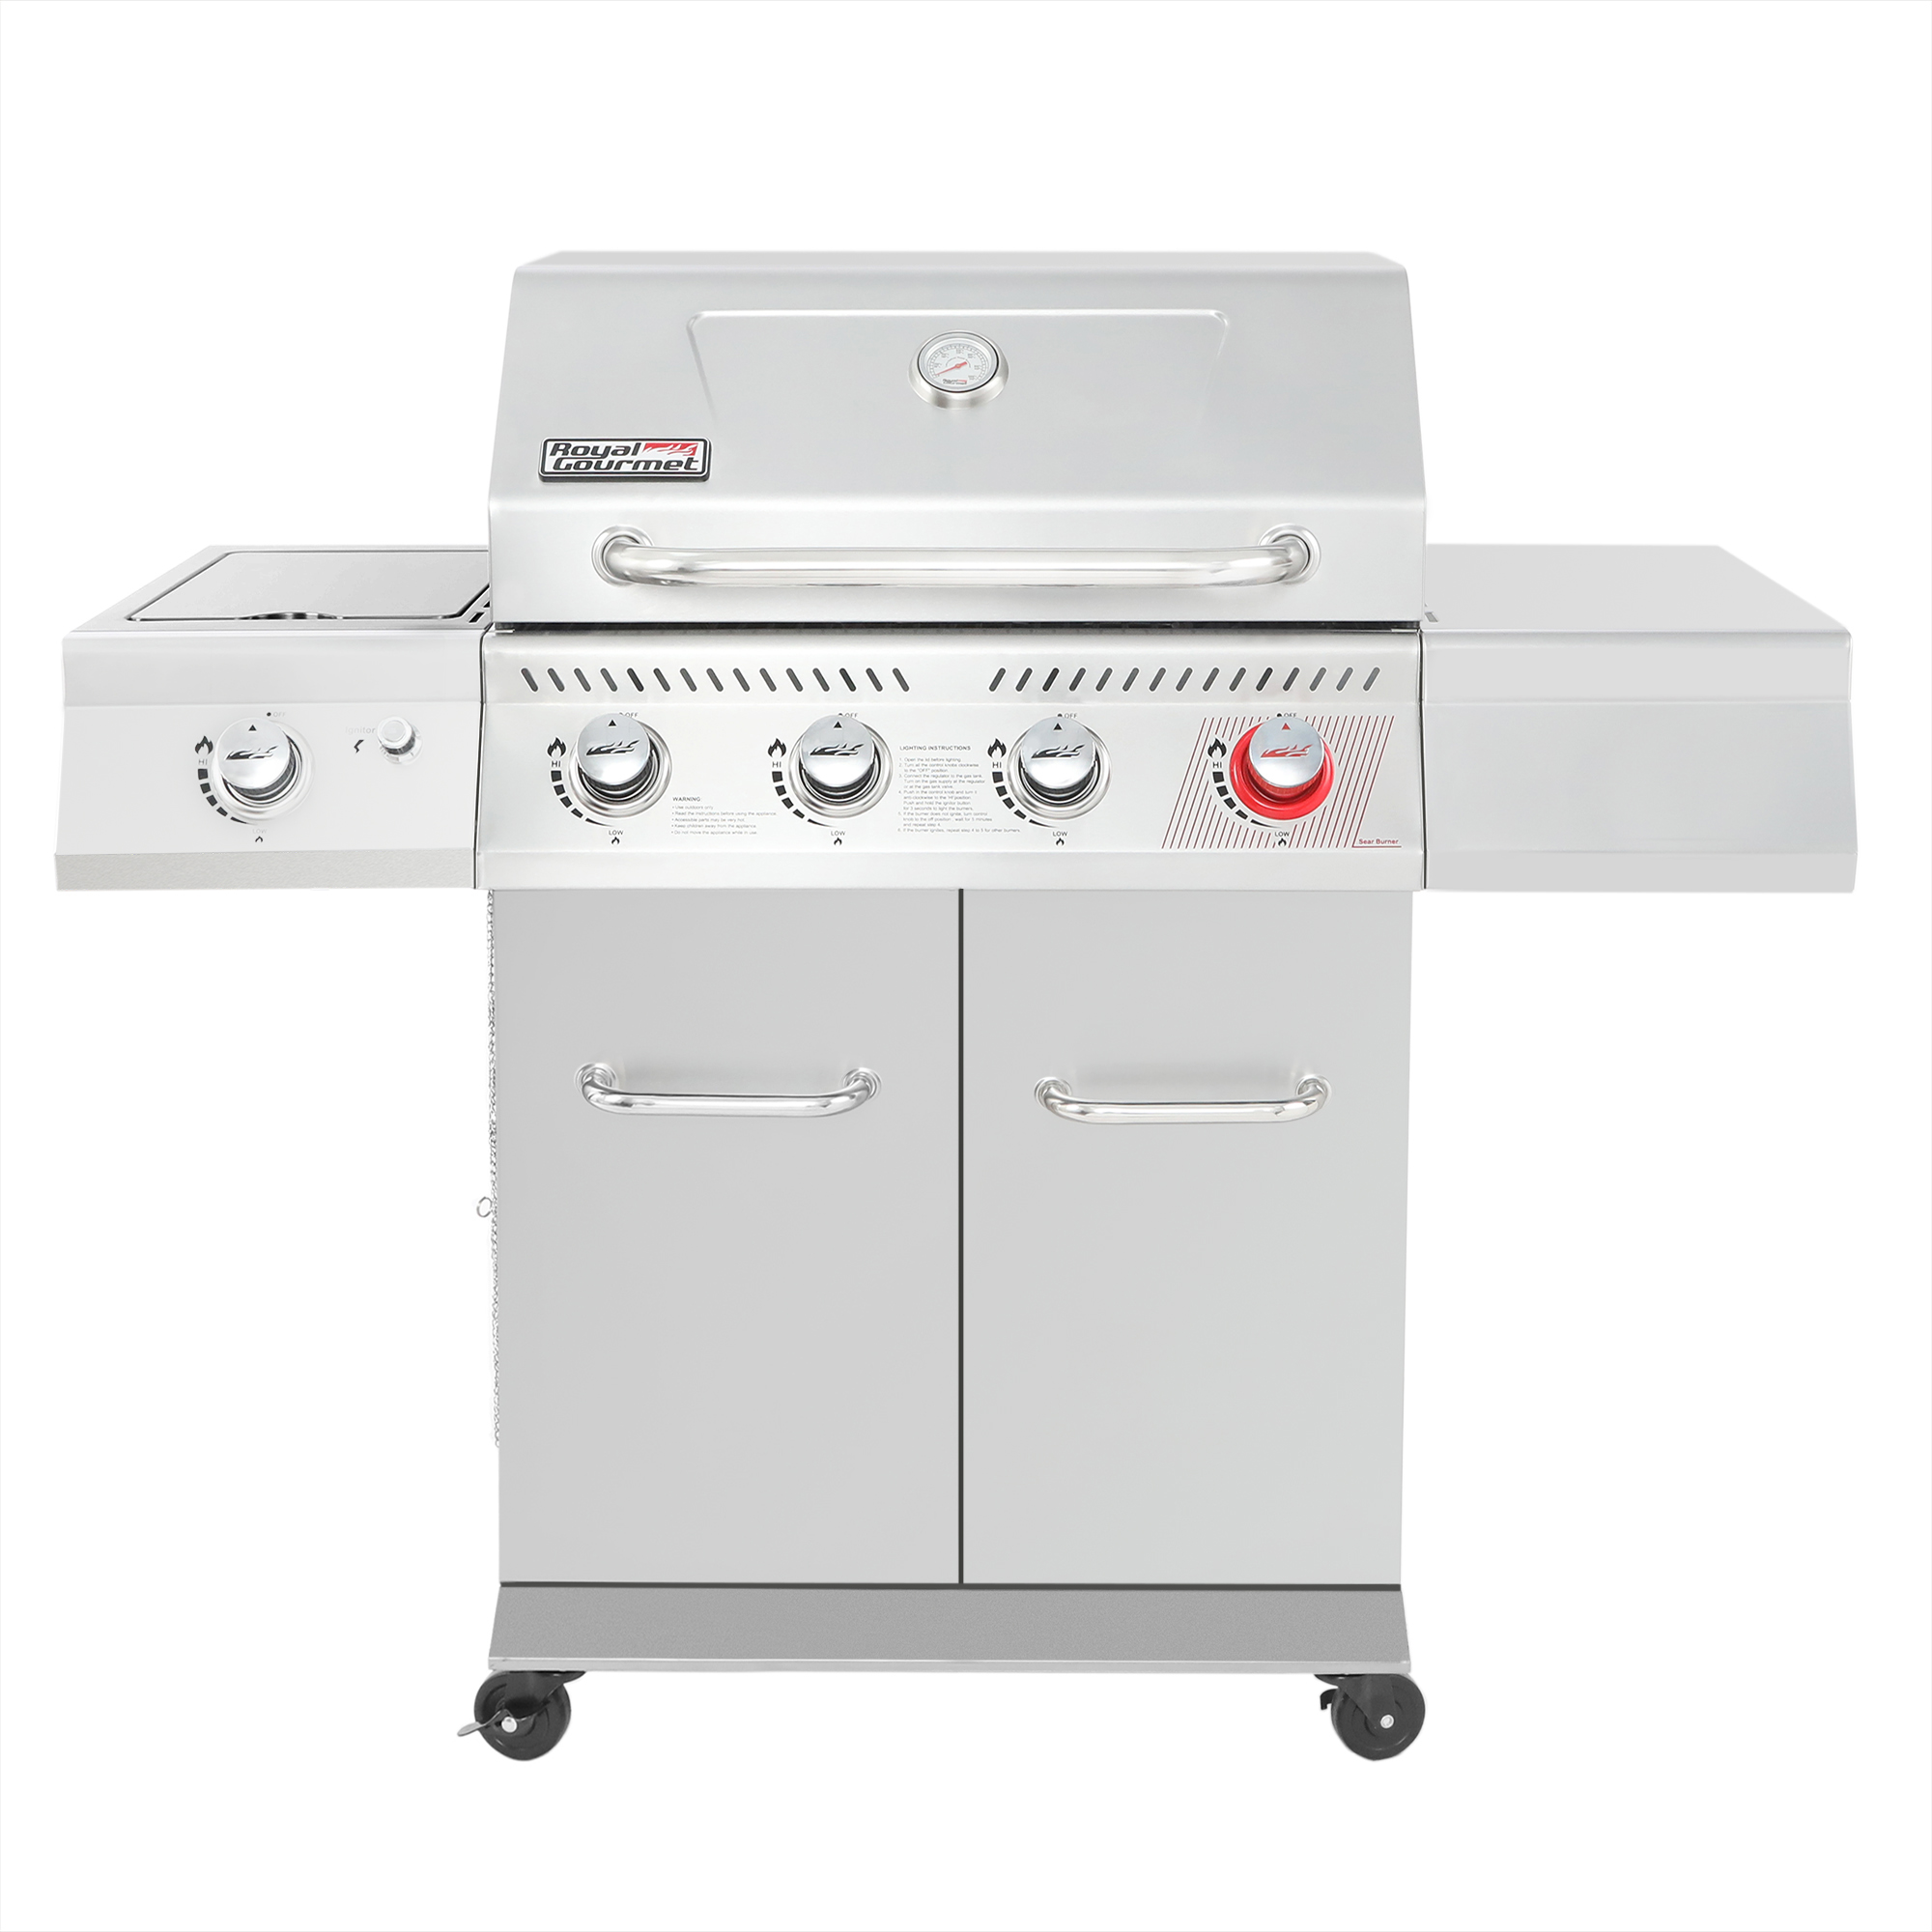 Royal Gourmet GA4402S Stainless Steel 4-Burner BBQ Cabinet Style Gas Grill with Sear Burner and Side Burner Silver - image 1 of 11